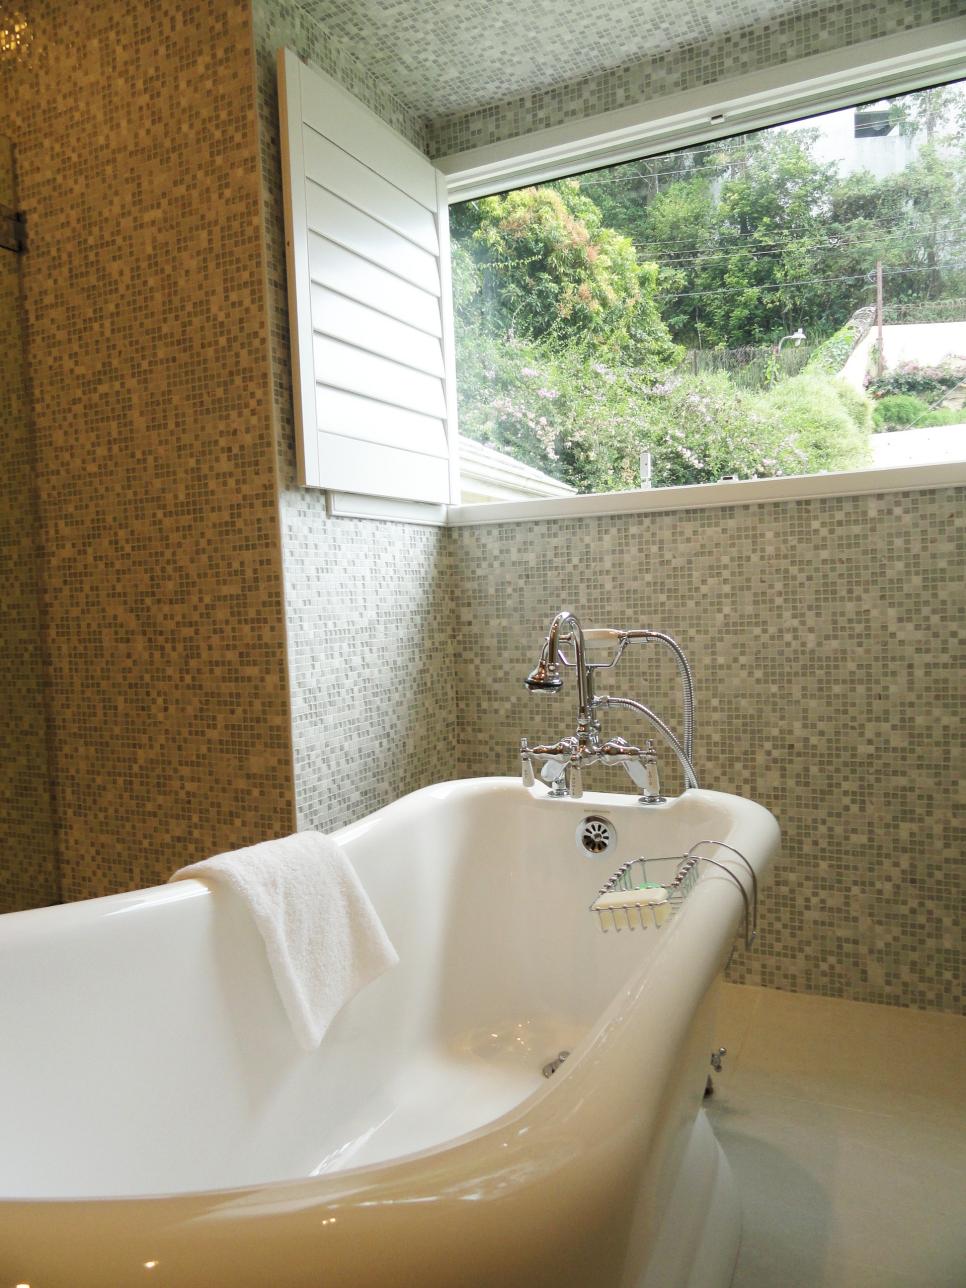 Transitional Bathroom with Freestanding Tub and Mosaic Tile Walls 